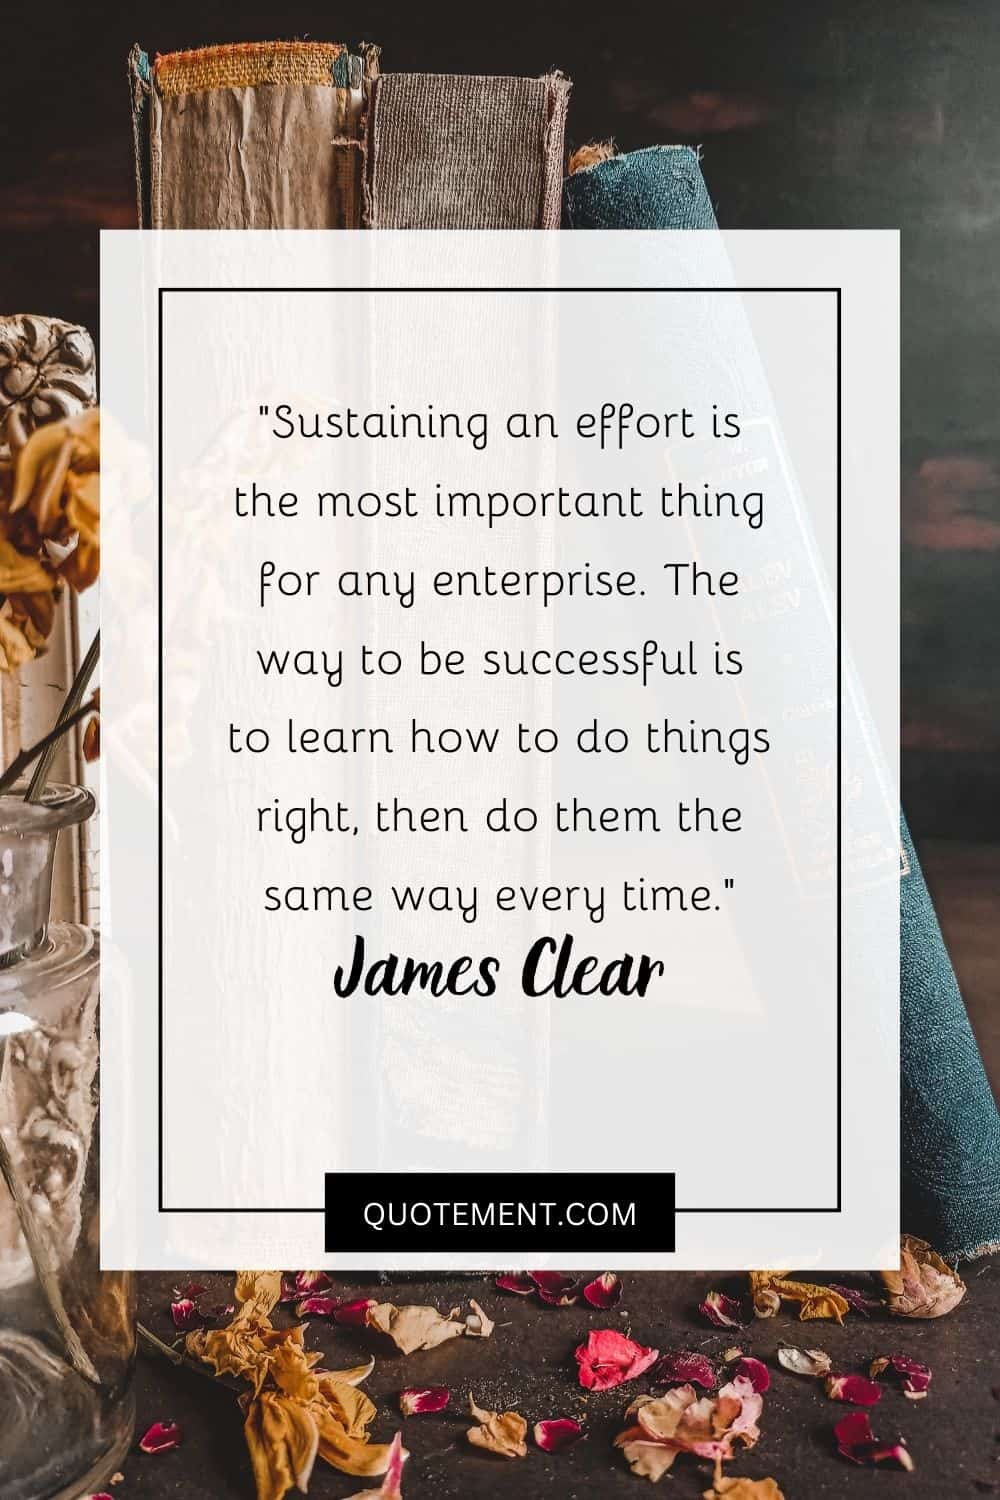 Sustaining an effort is the most important thing for any enterprise.